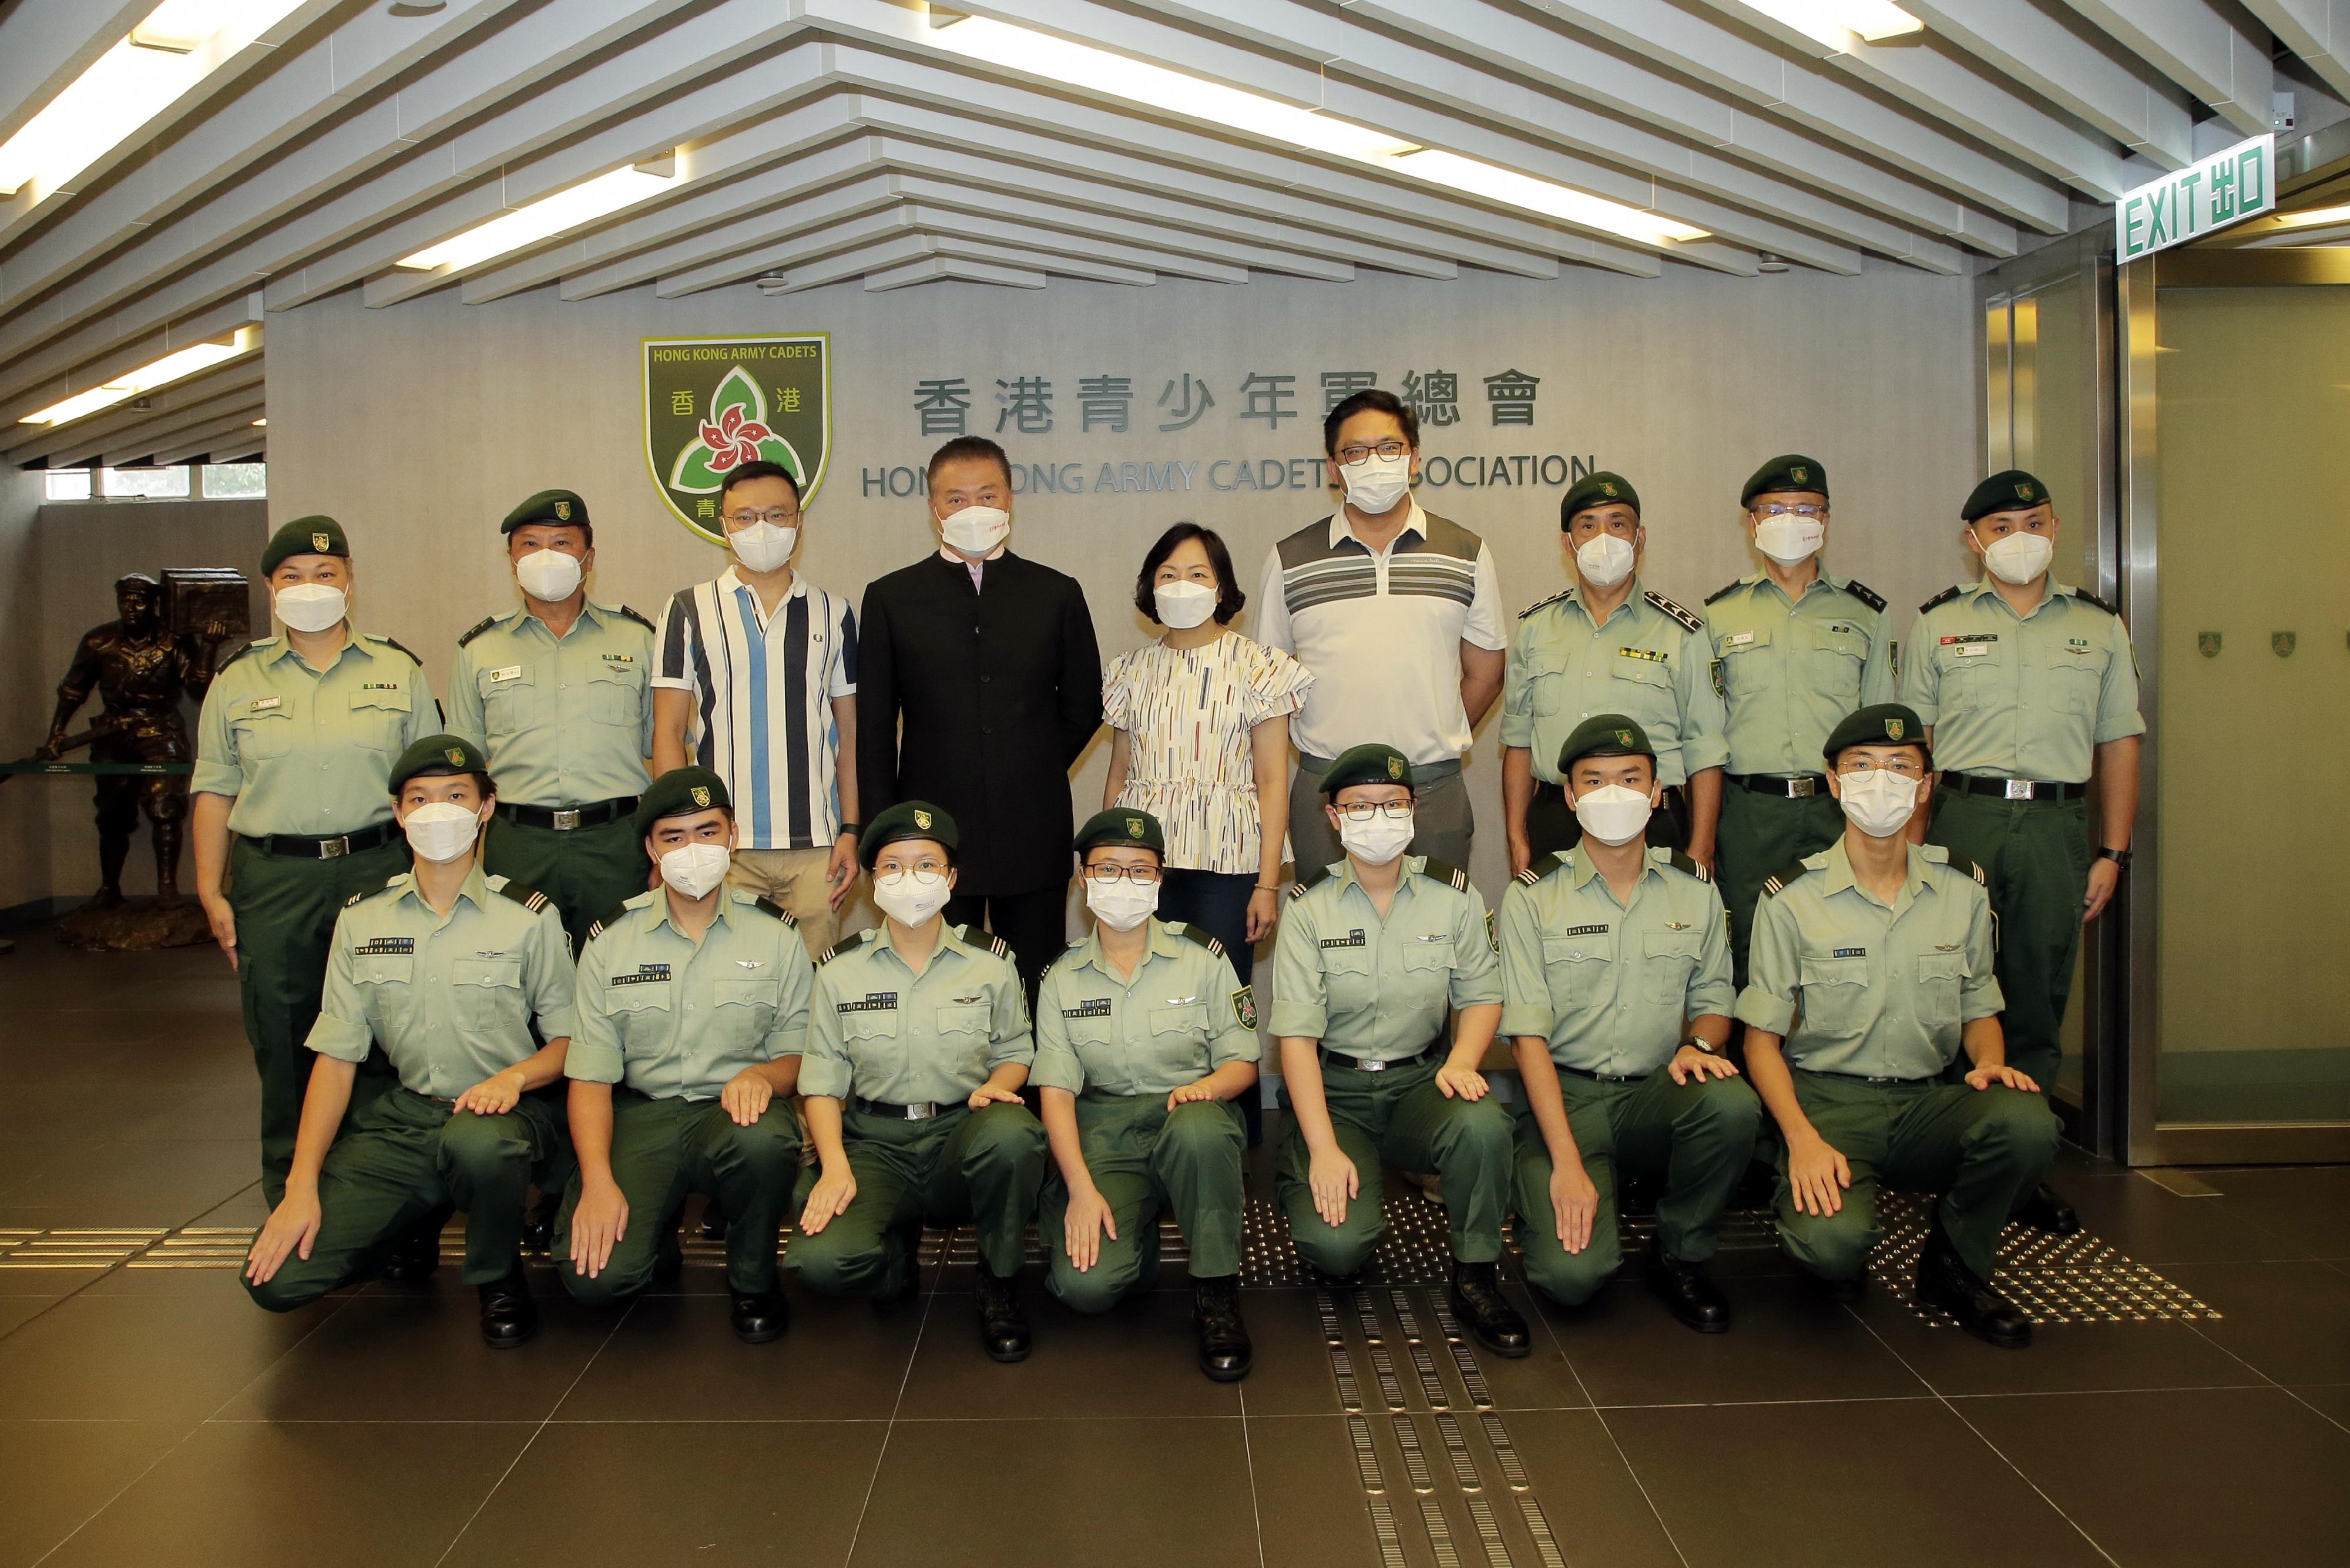 The Secretary for Home and Youth Affairs, Miss Alice Mak, today (September 10) visited the Hong Kong Army Cadets Association (HKACA). Photo shows Miss Mak (back row, centre) and the Under Secretary for Home and Youth Affairs, Mr Clarence Leung (back row, fourth right), with young cadets at the HKACA.


